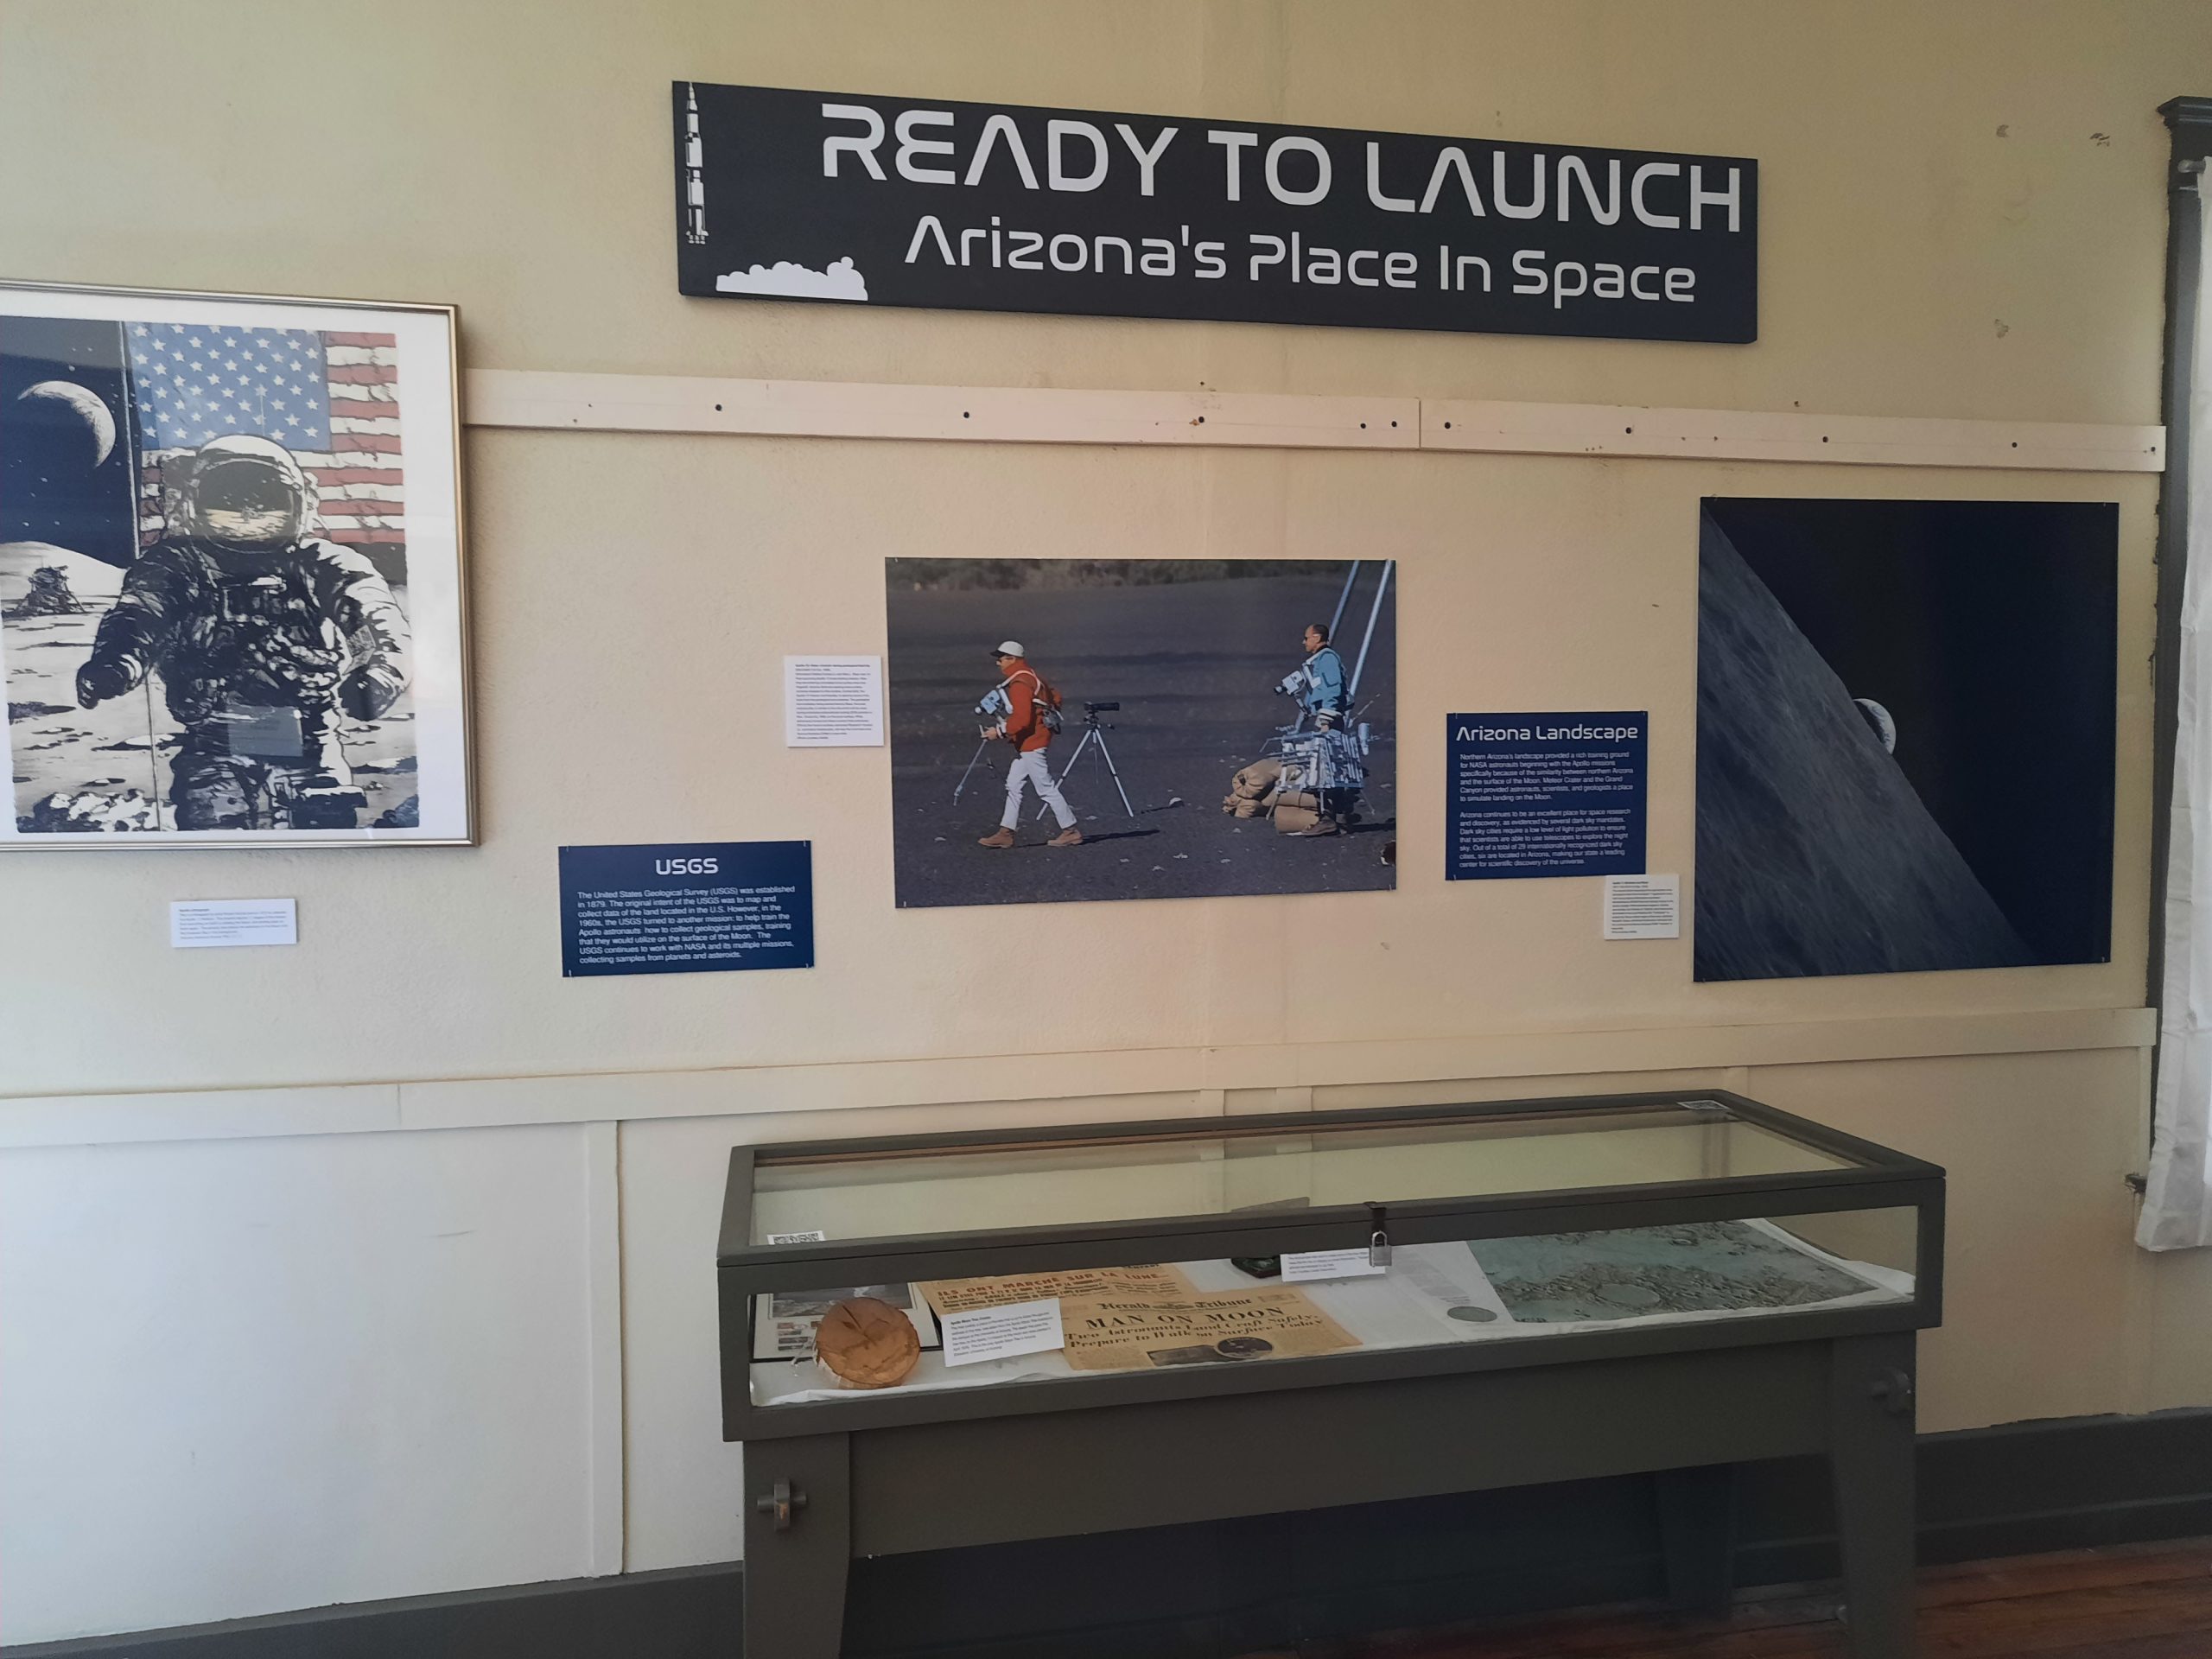 Ready to Launch: Arizona's Place in Space